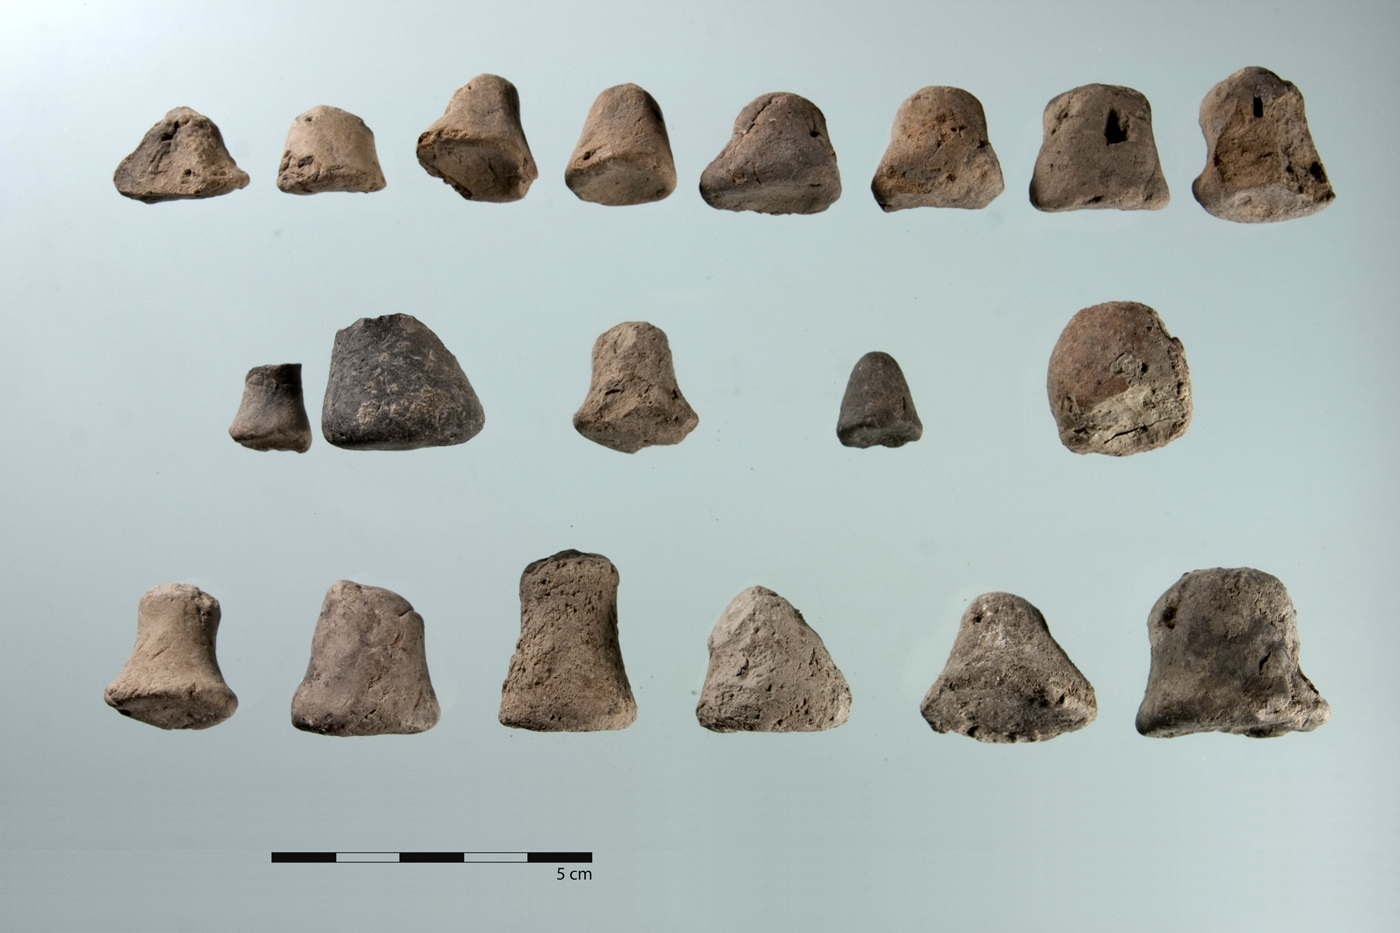 Squat, conical and pyramidal tokens. Several show punctures (for example, the two rightmost pieces in the upper row).